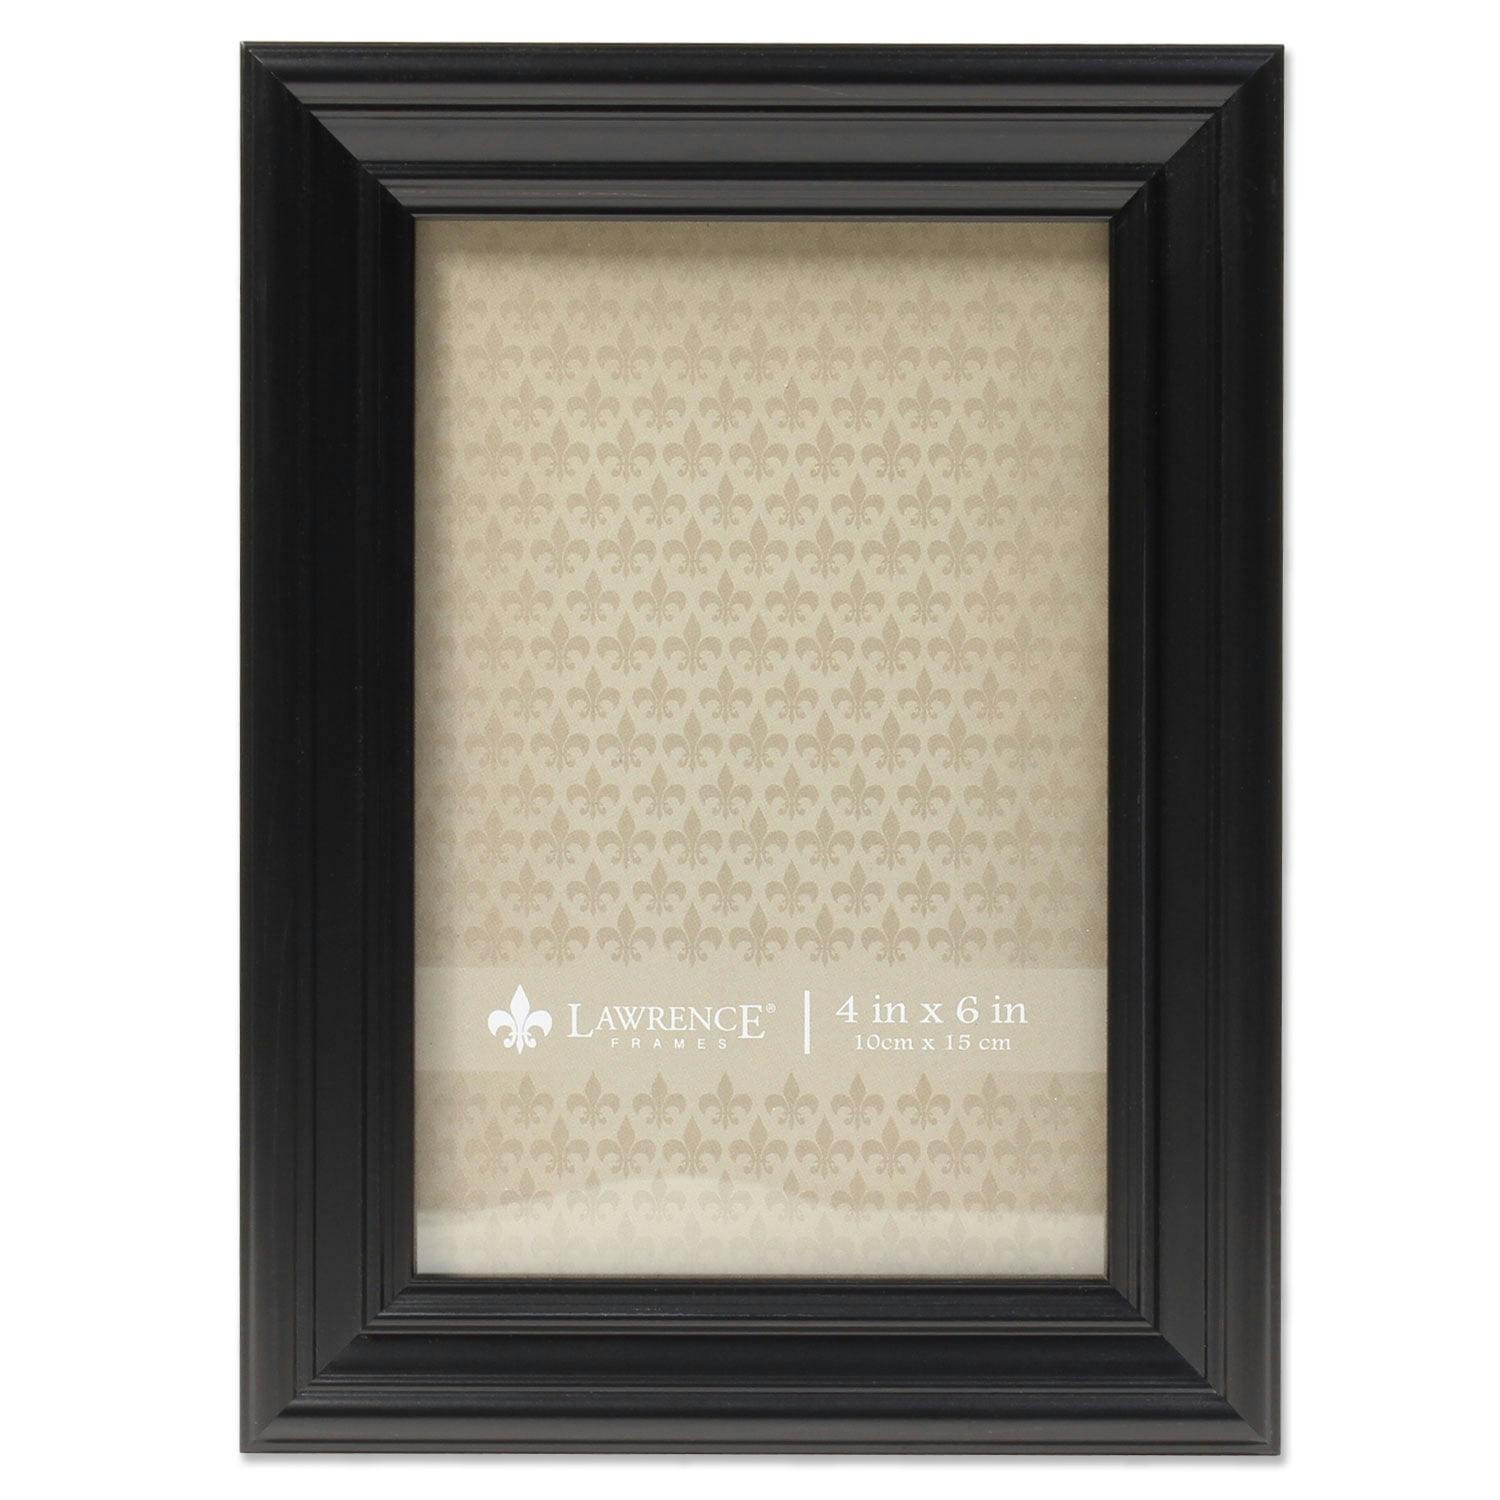 Elegant Classic 4x6 Black Wood Tabletop & Wall Picture Frame